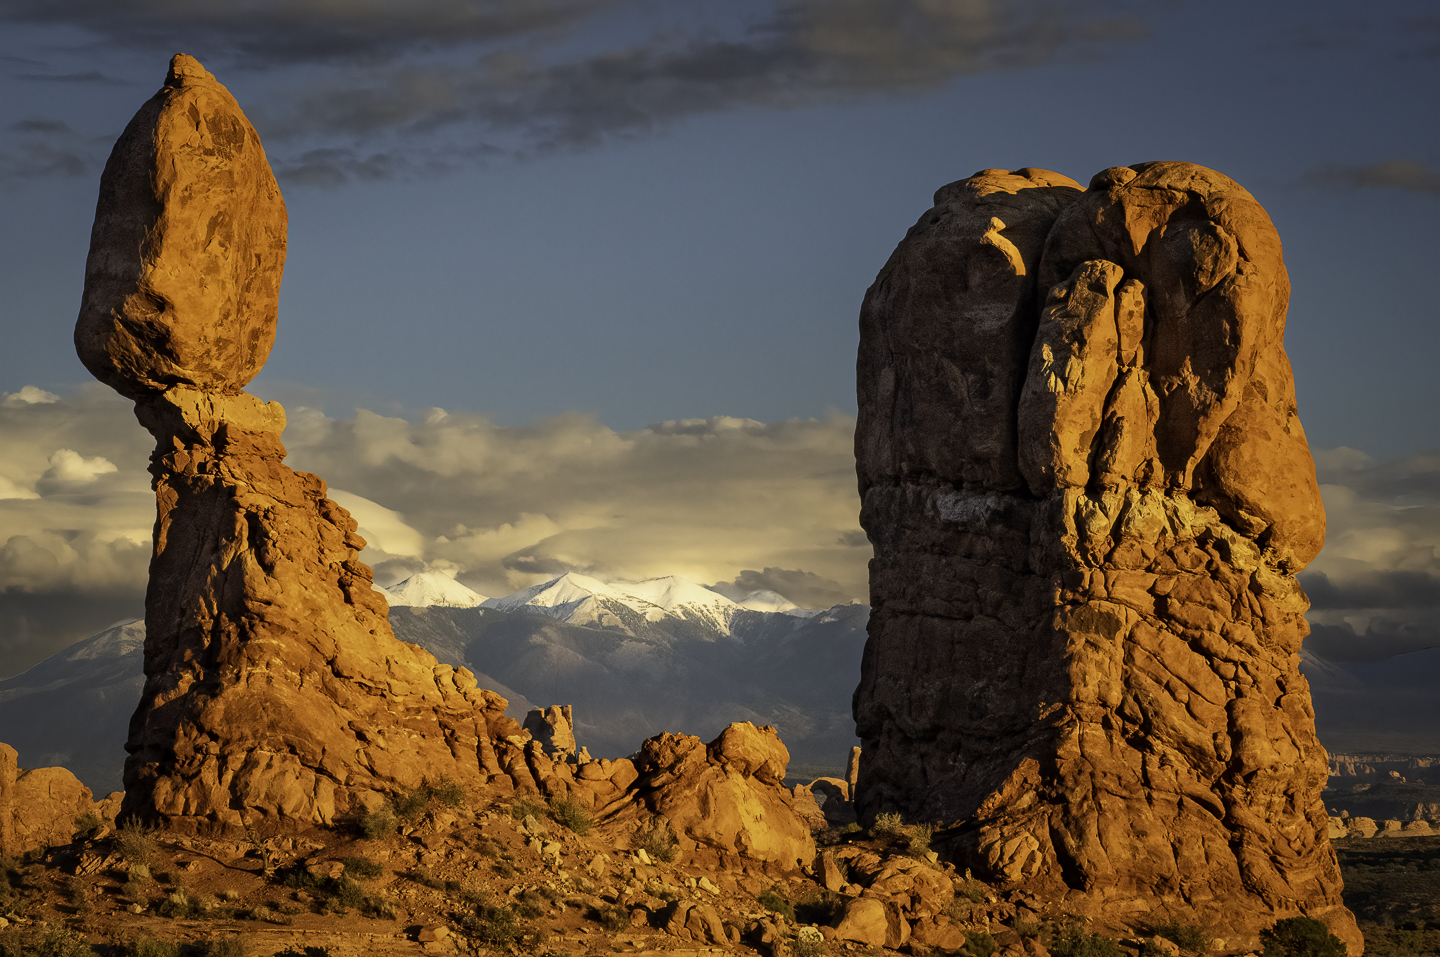 2nd PrizeOpen Color In Class 2 By Jim Cotter For Balancing Rock After The Storm MAR-2023.jpg